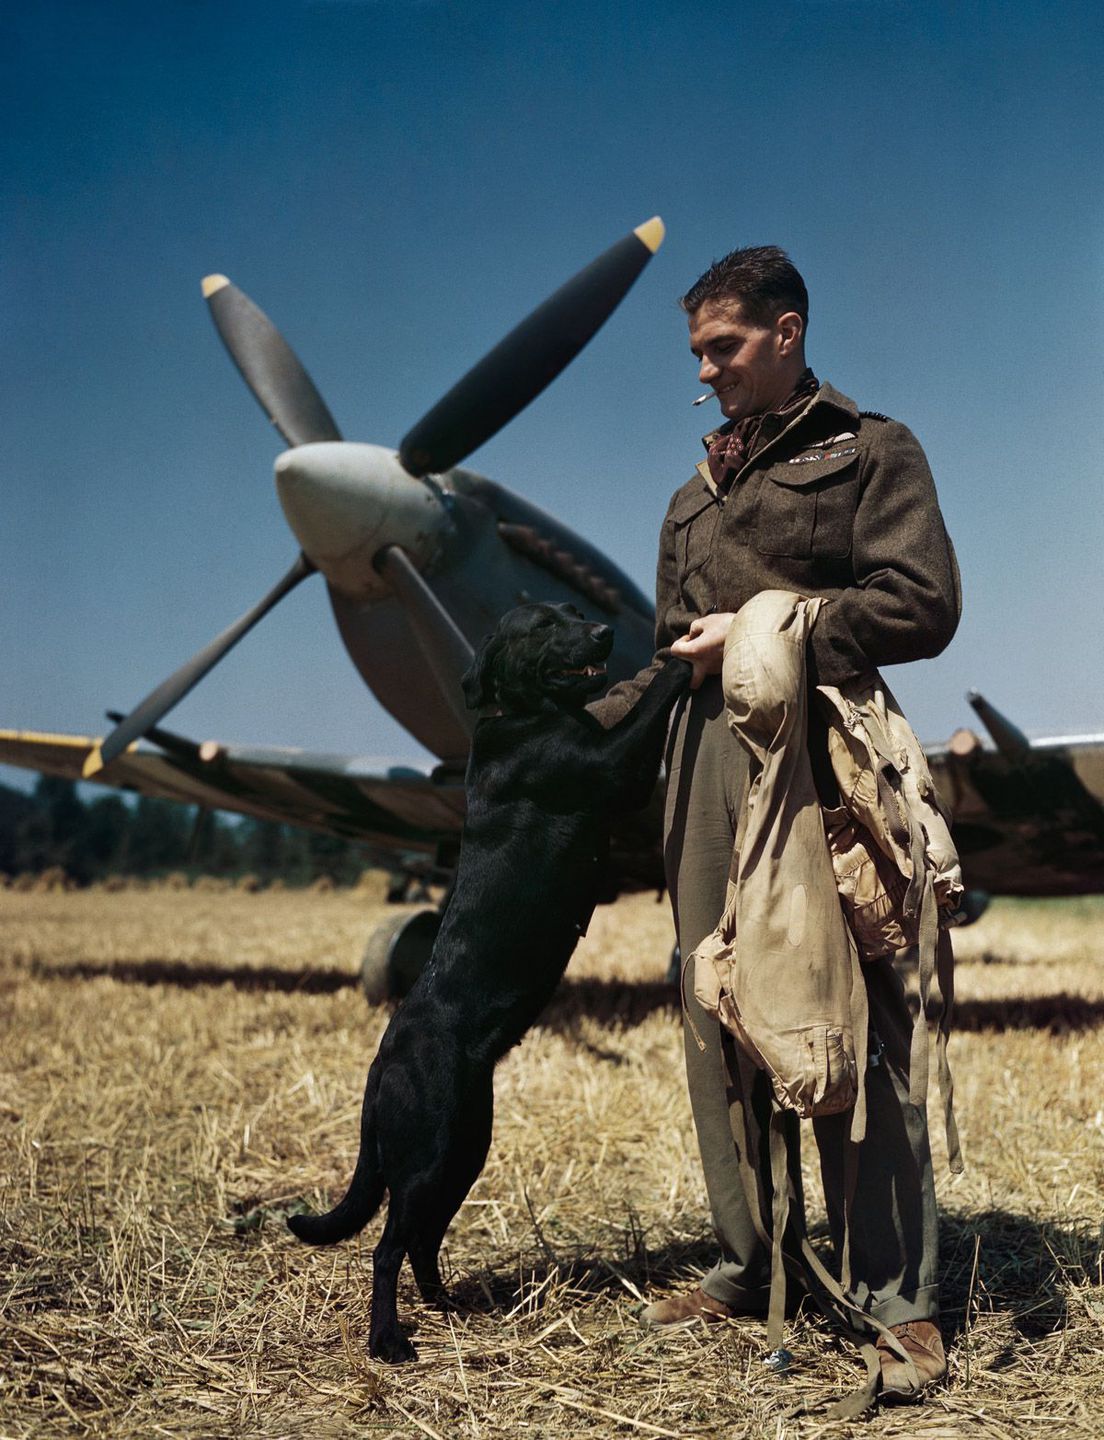 July 1944 The RAF’s top-scoring fighter pilot, Wing Commander James ‘Johnnie’ Johnson, with his Spitfire and pet Labrador ‘Sally’ in Normandy.